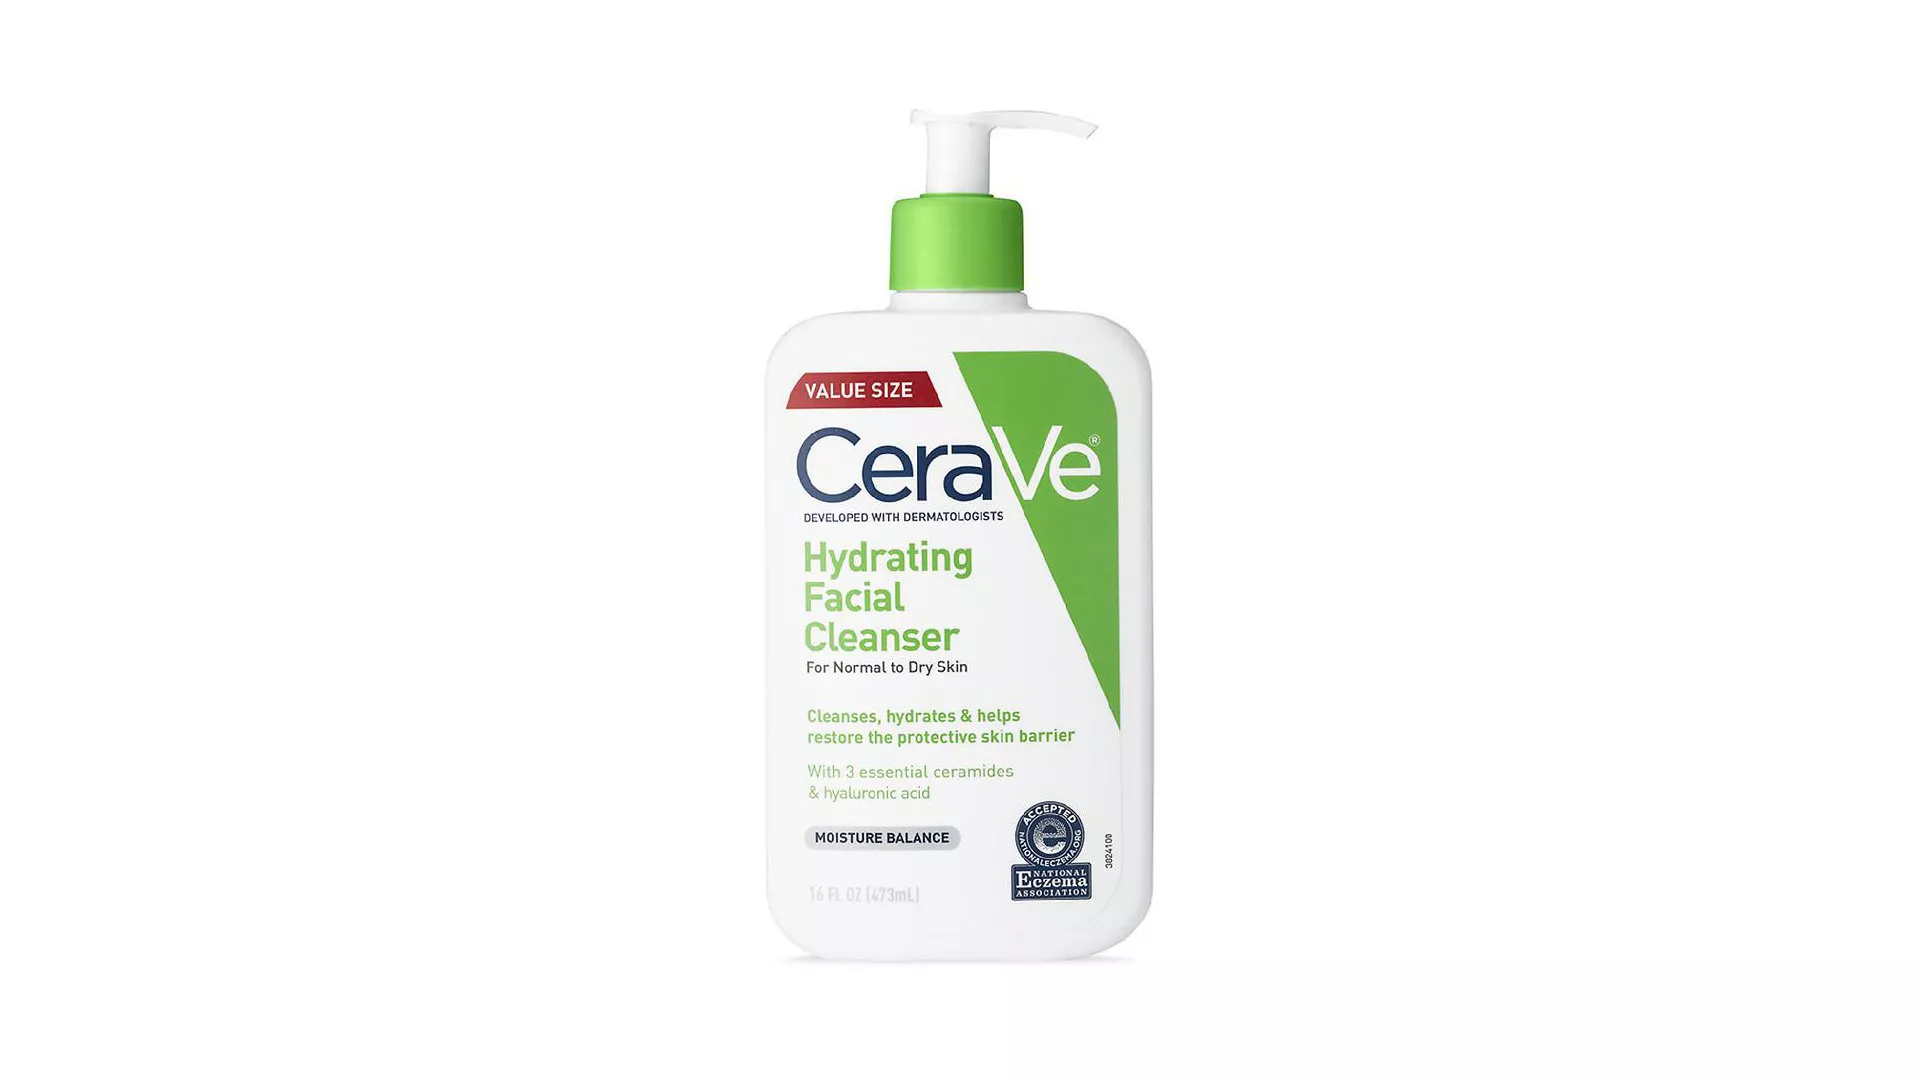 Cerave hydrating facial cleanser